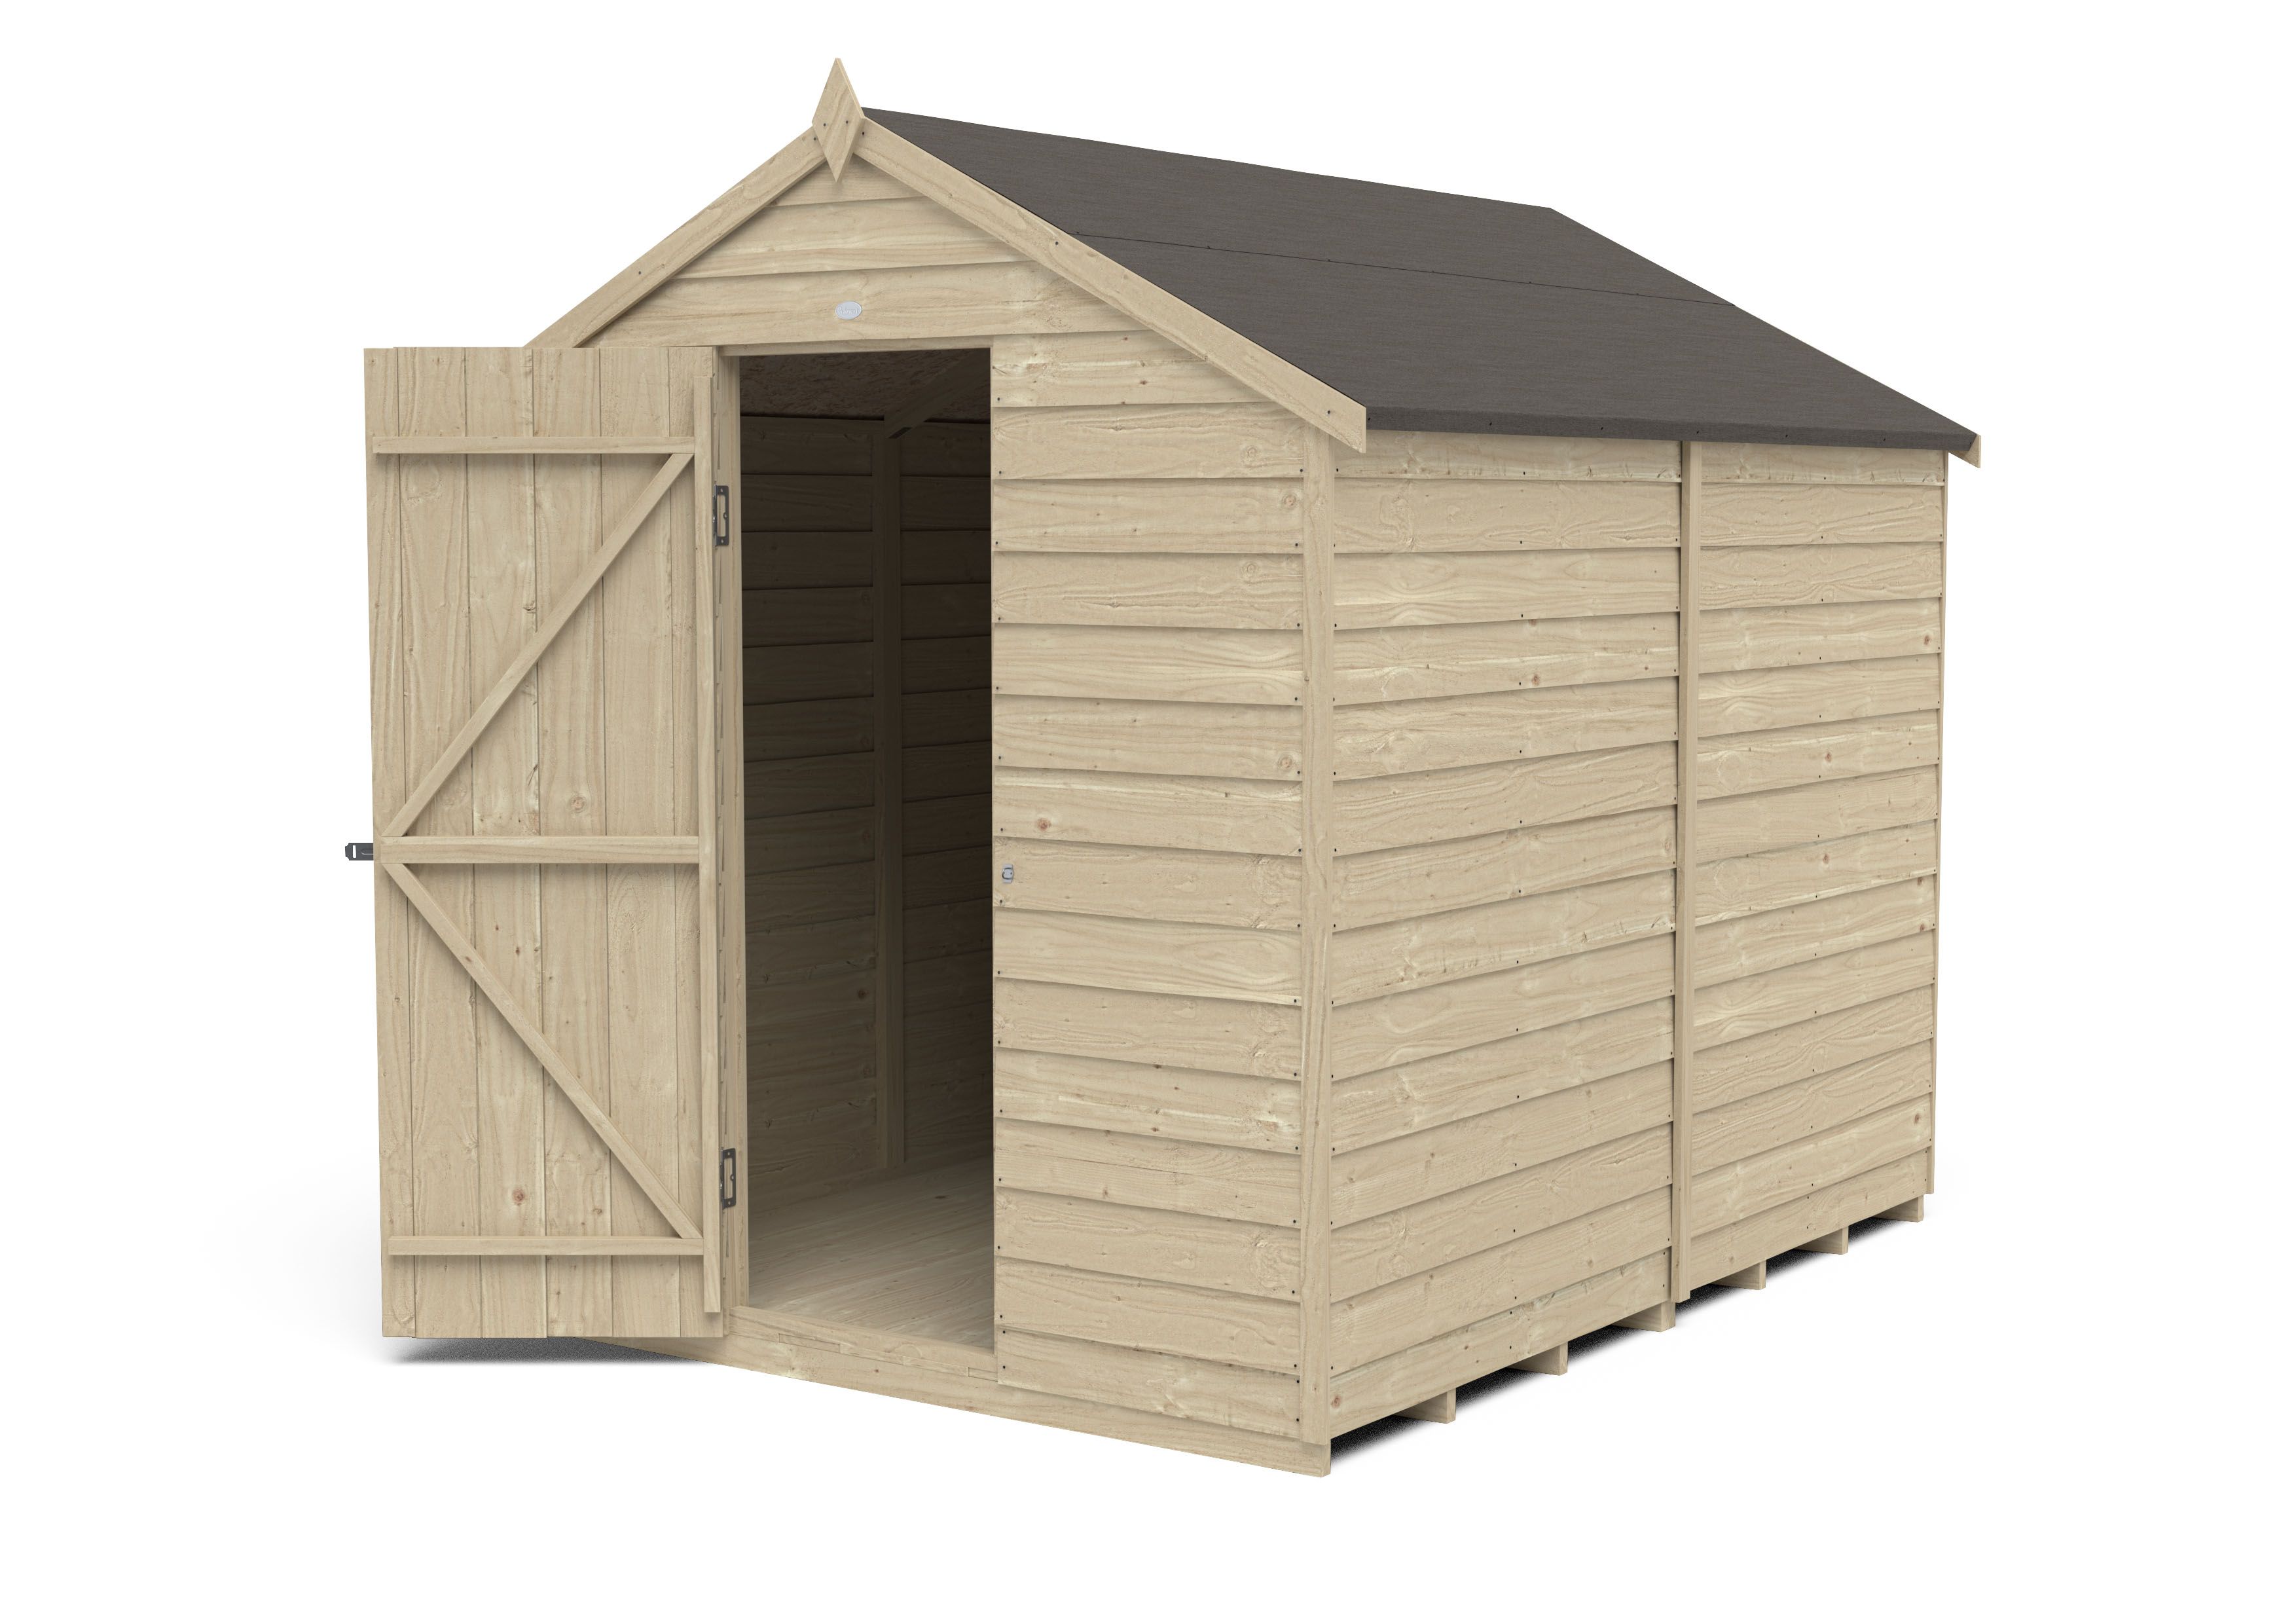 Forest Garden Overlap 8x6 ft Apex Wooden Pressure treated Shed with floor (Base included) - Assembly service included